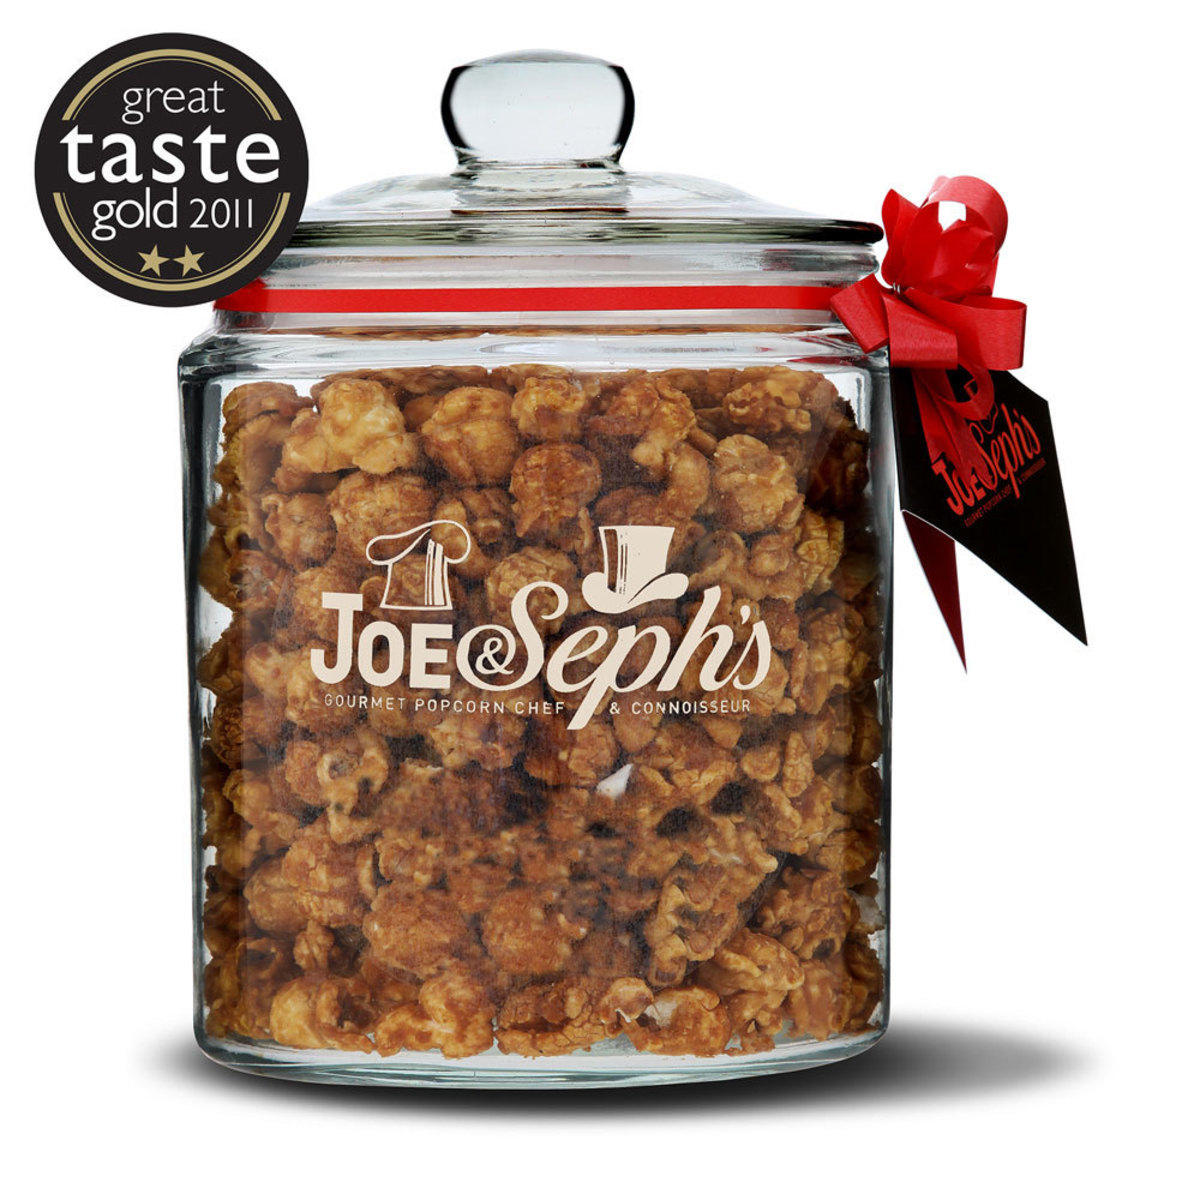 Resuable Glass Jar showing Popcorn with Red Bow and Joeseph brand label